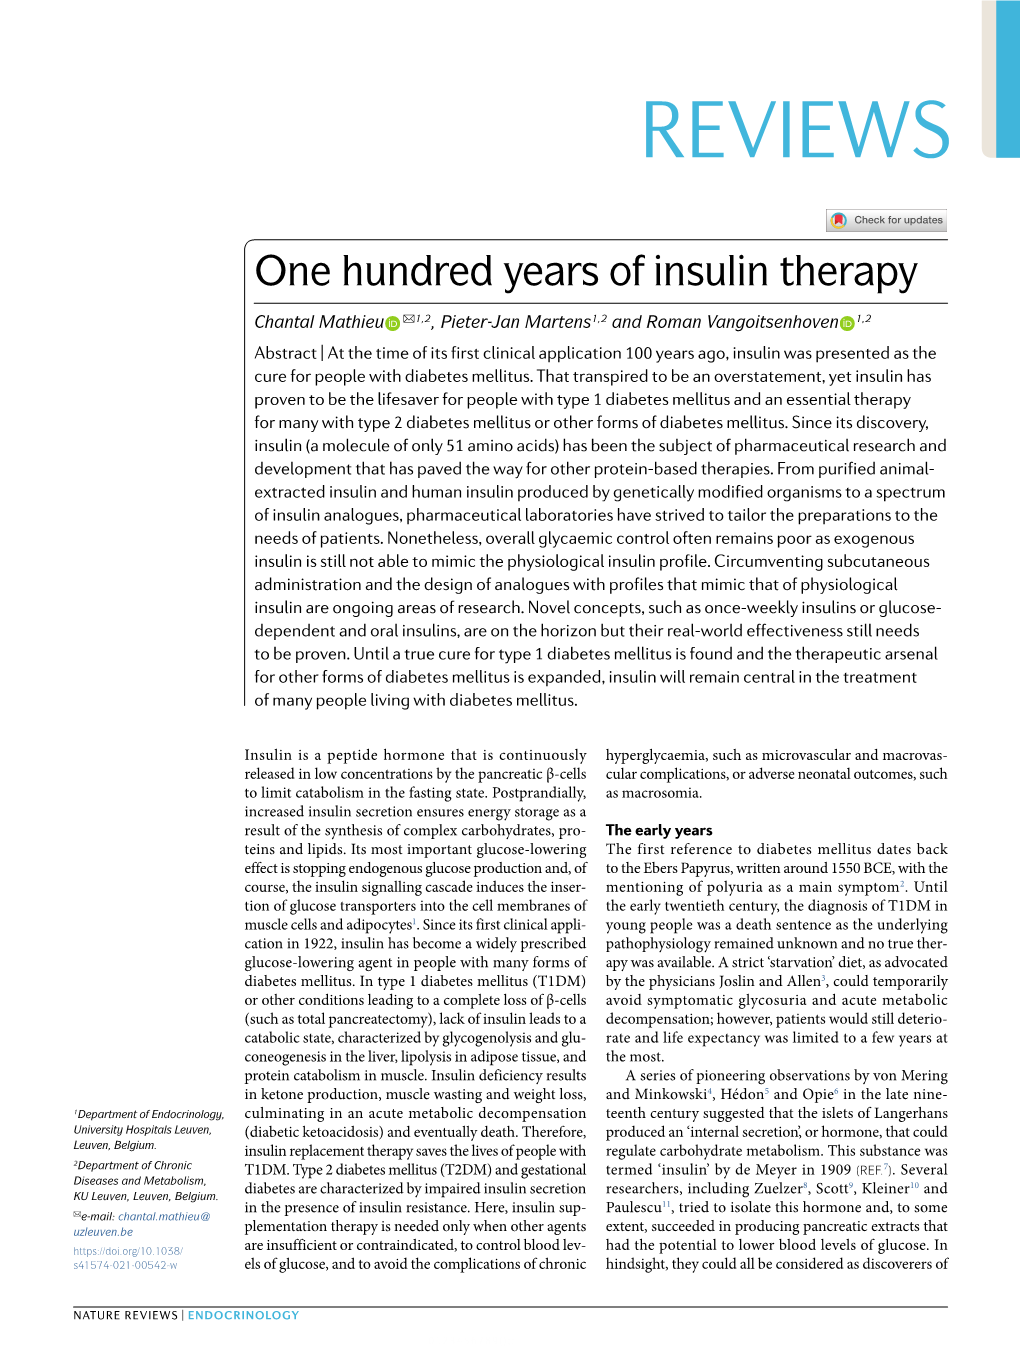 One Hundred Years of Insulin Therapy